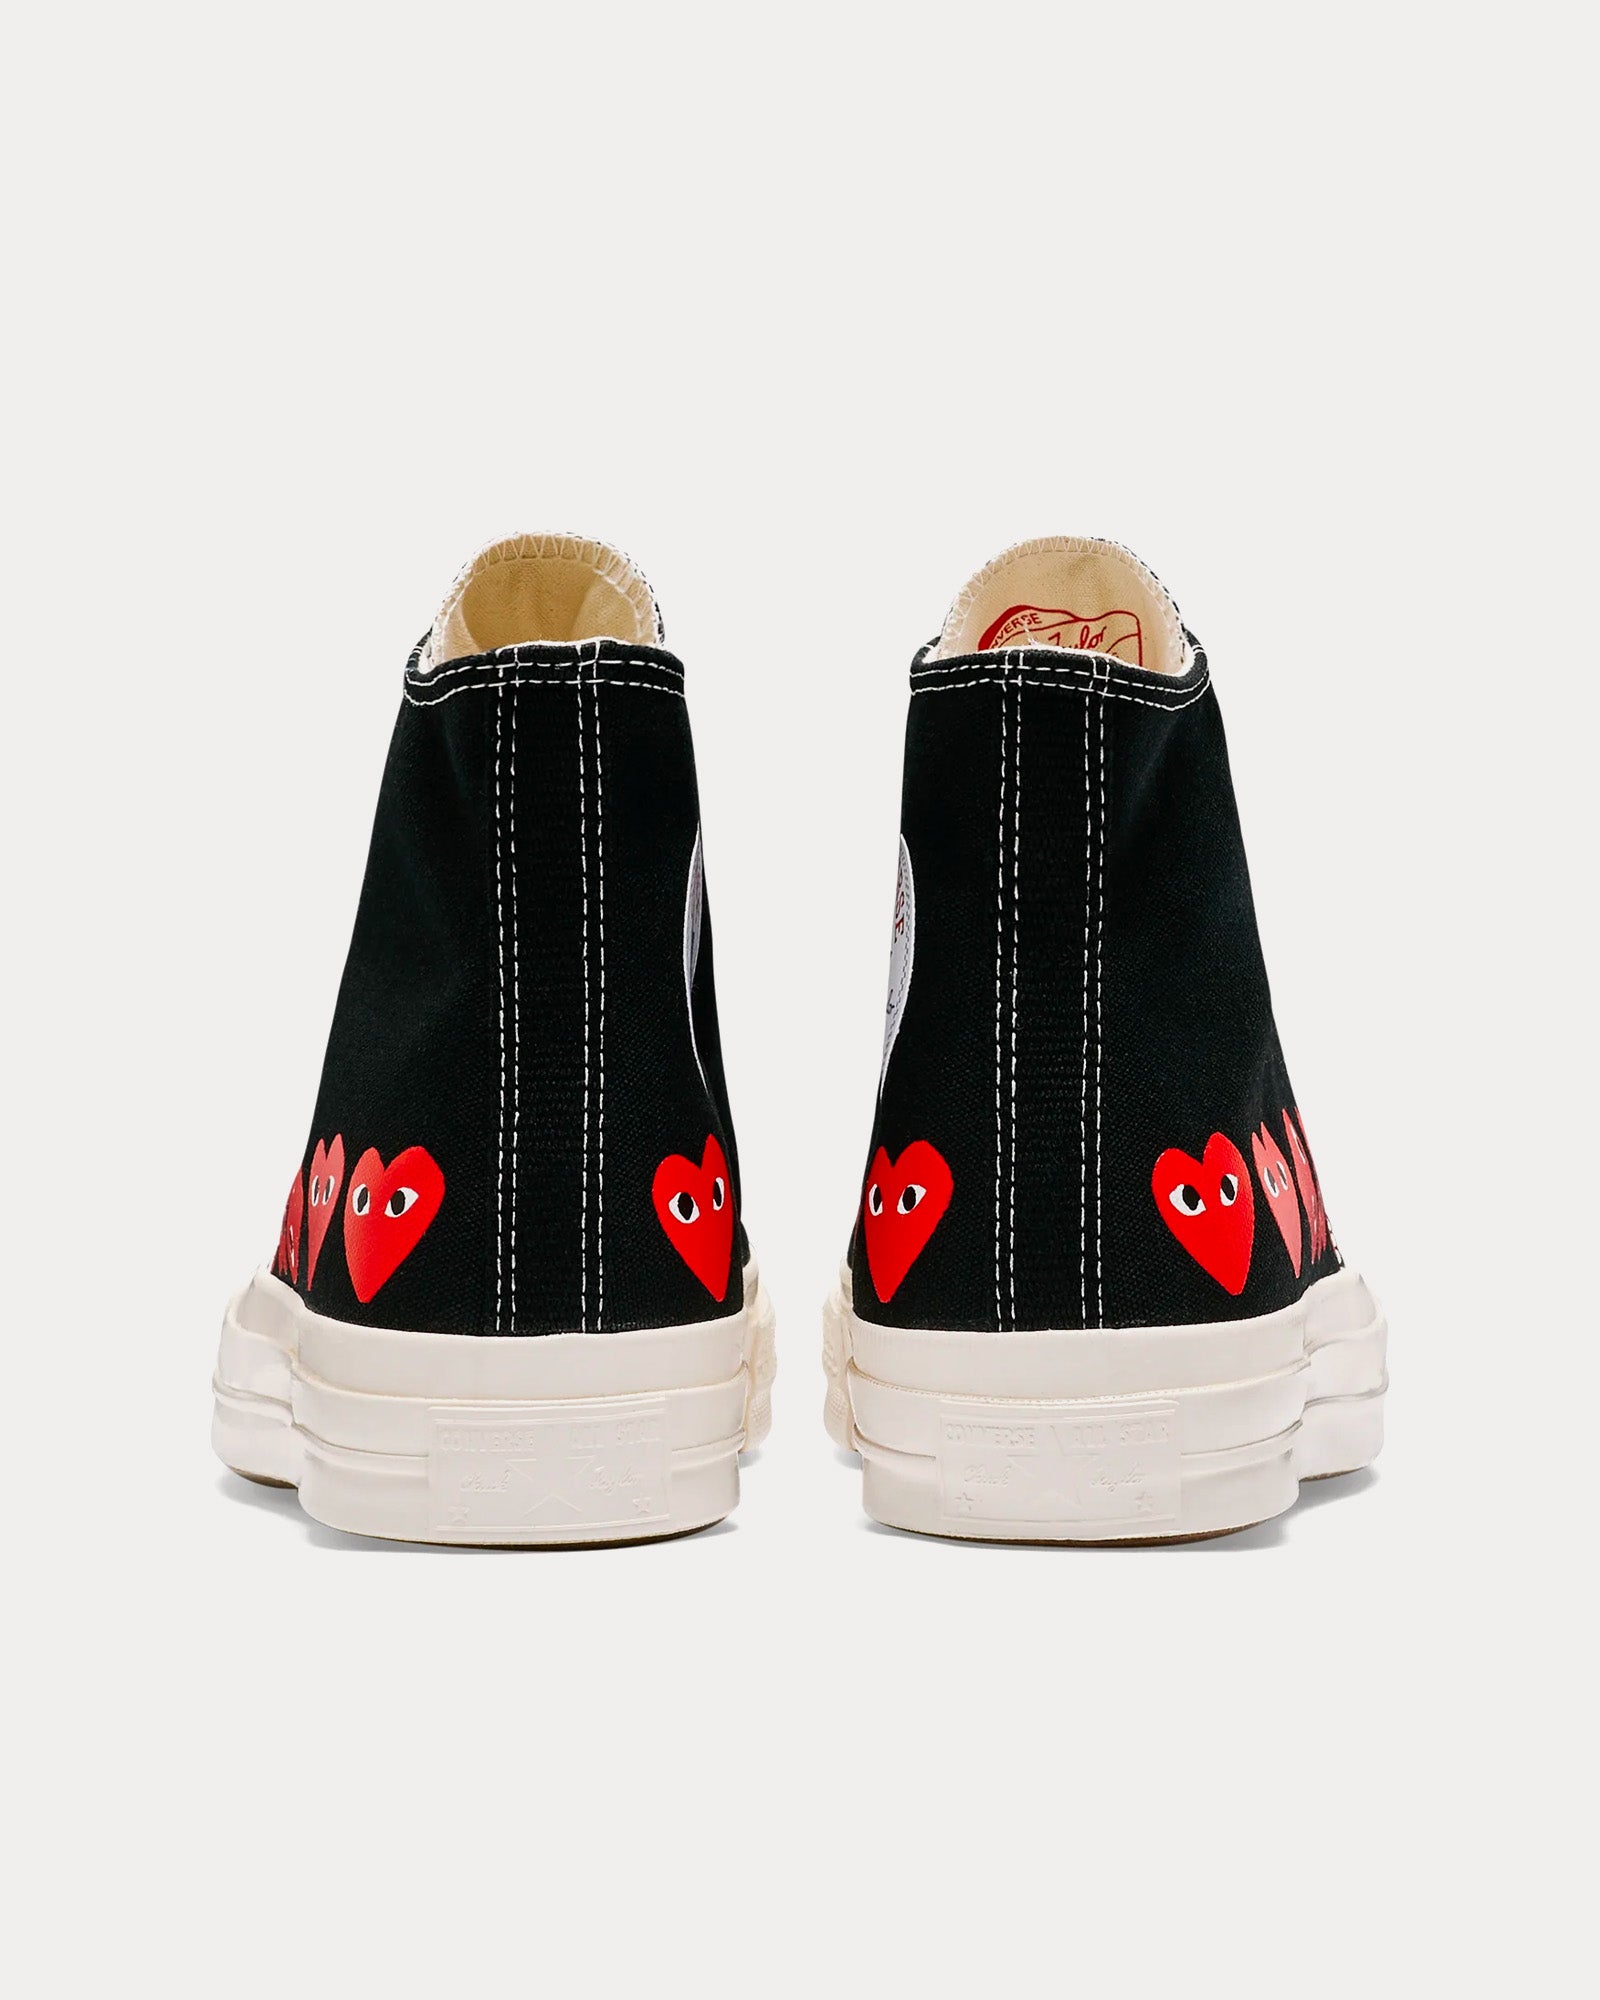 Converse x Comme des Garçons PLAY - Chuck Taylor All Star '70 Multi Heart Black / Red High Top Sneakers